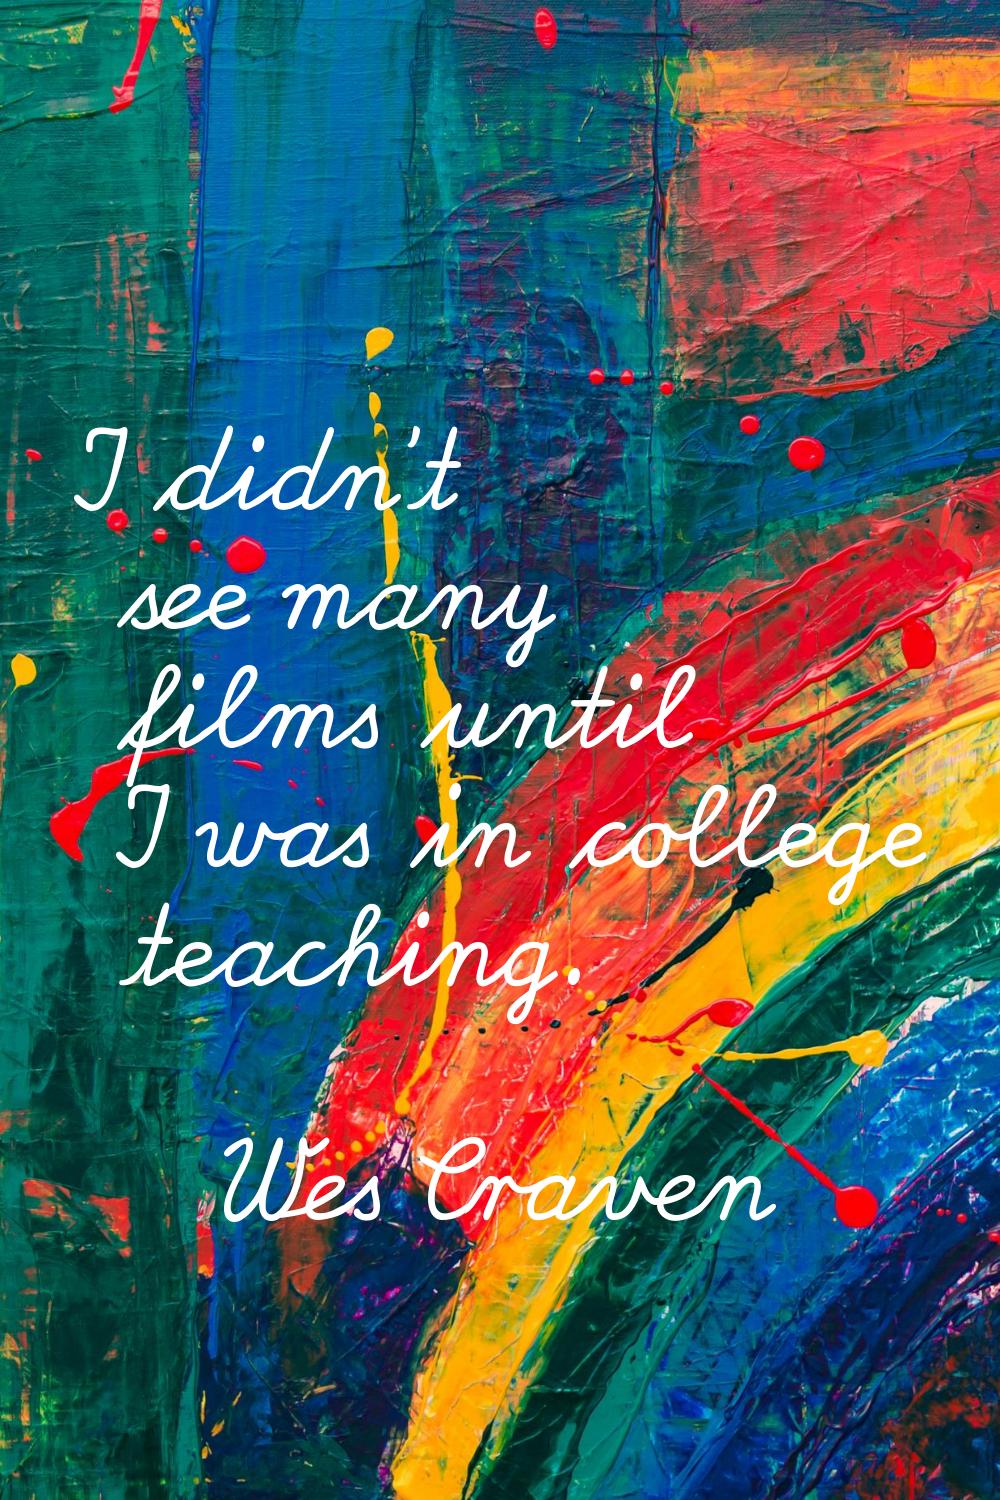 I didn't see many films until I was in college teaching.